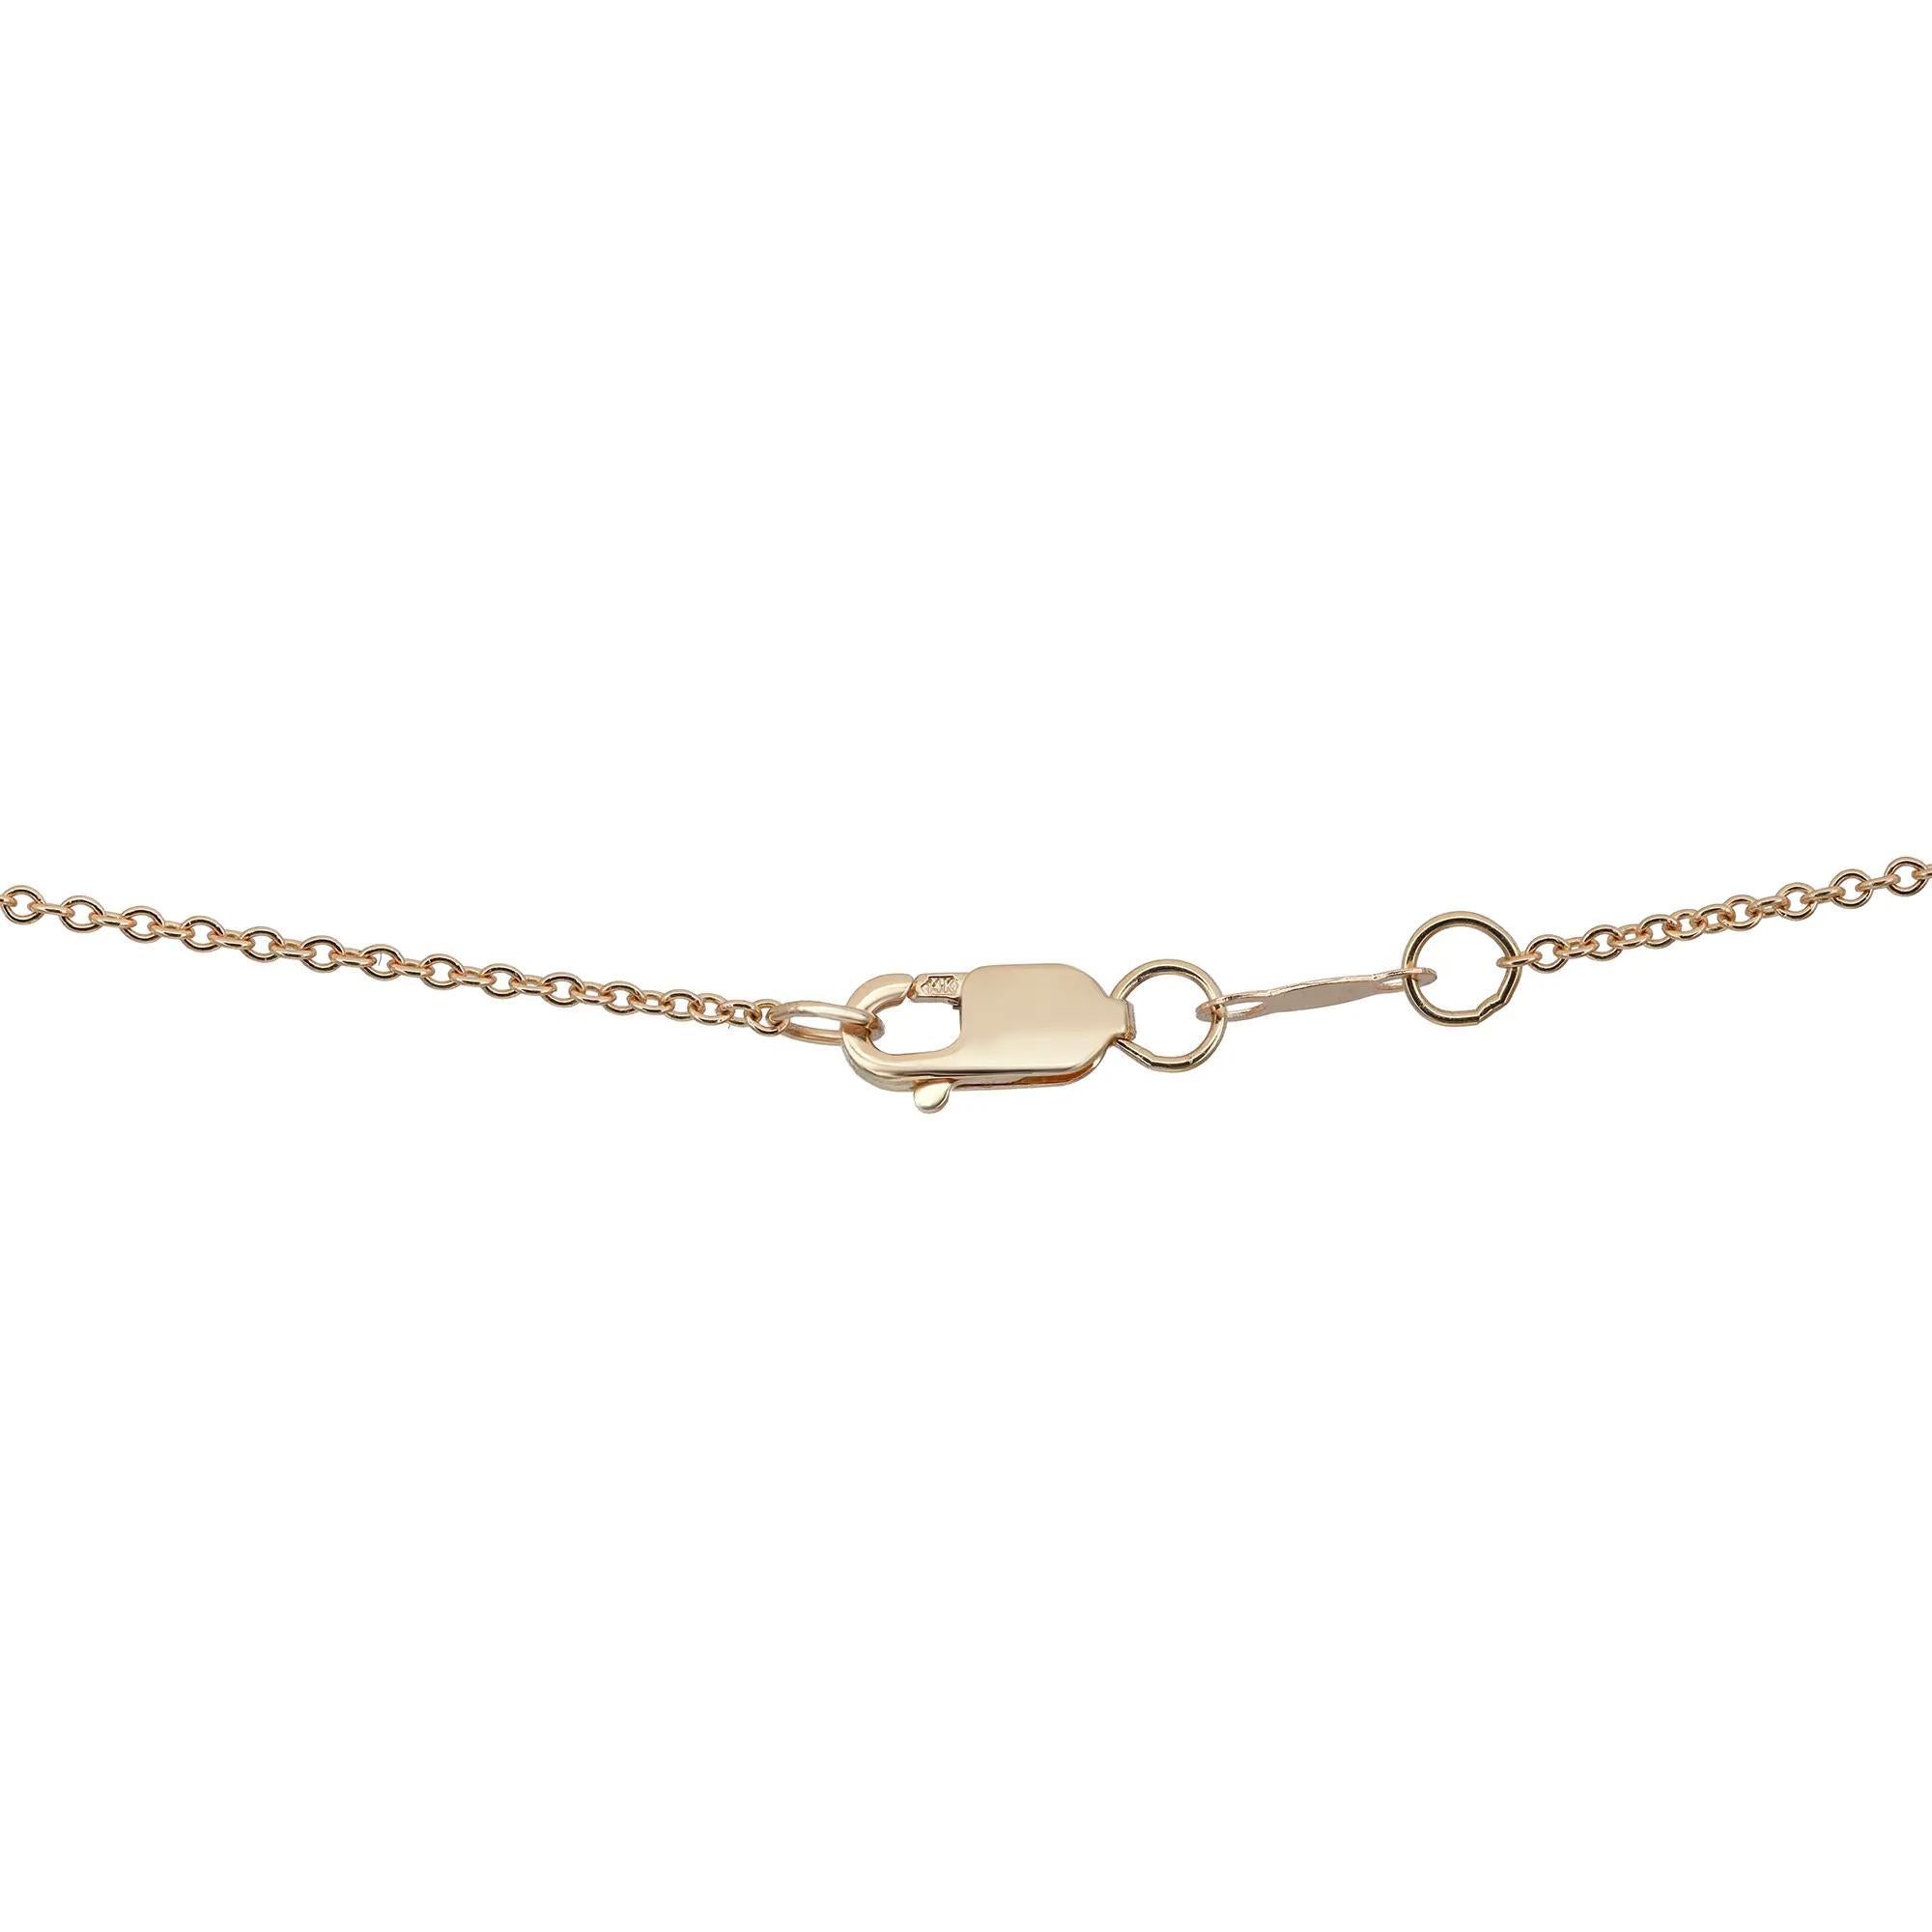 Diamond Heart Lariat Necklace Round Cut In 14K Yellow Gold 0.14Cttw For Sale 2